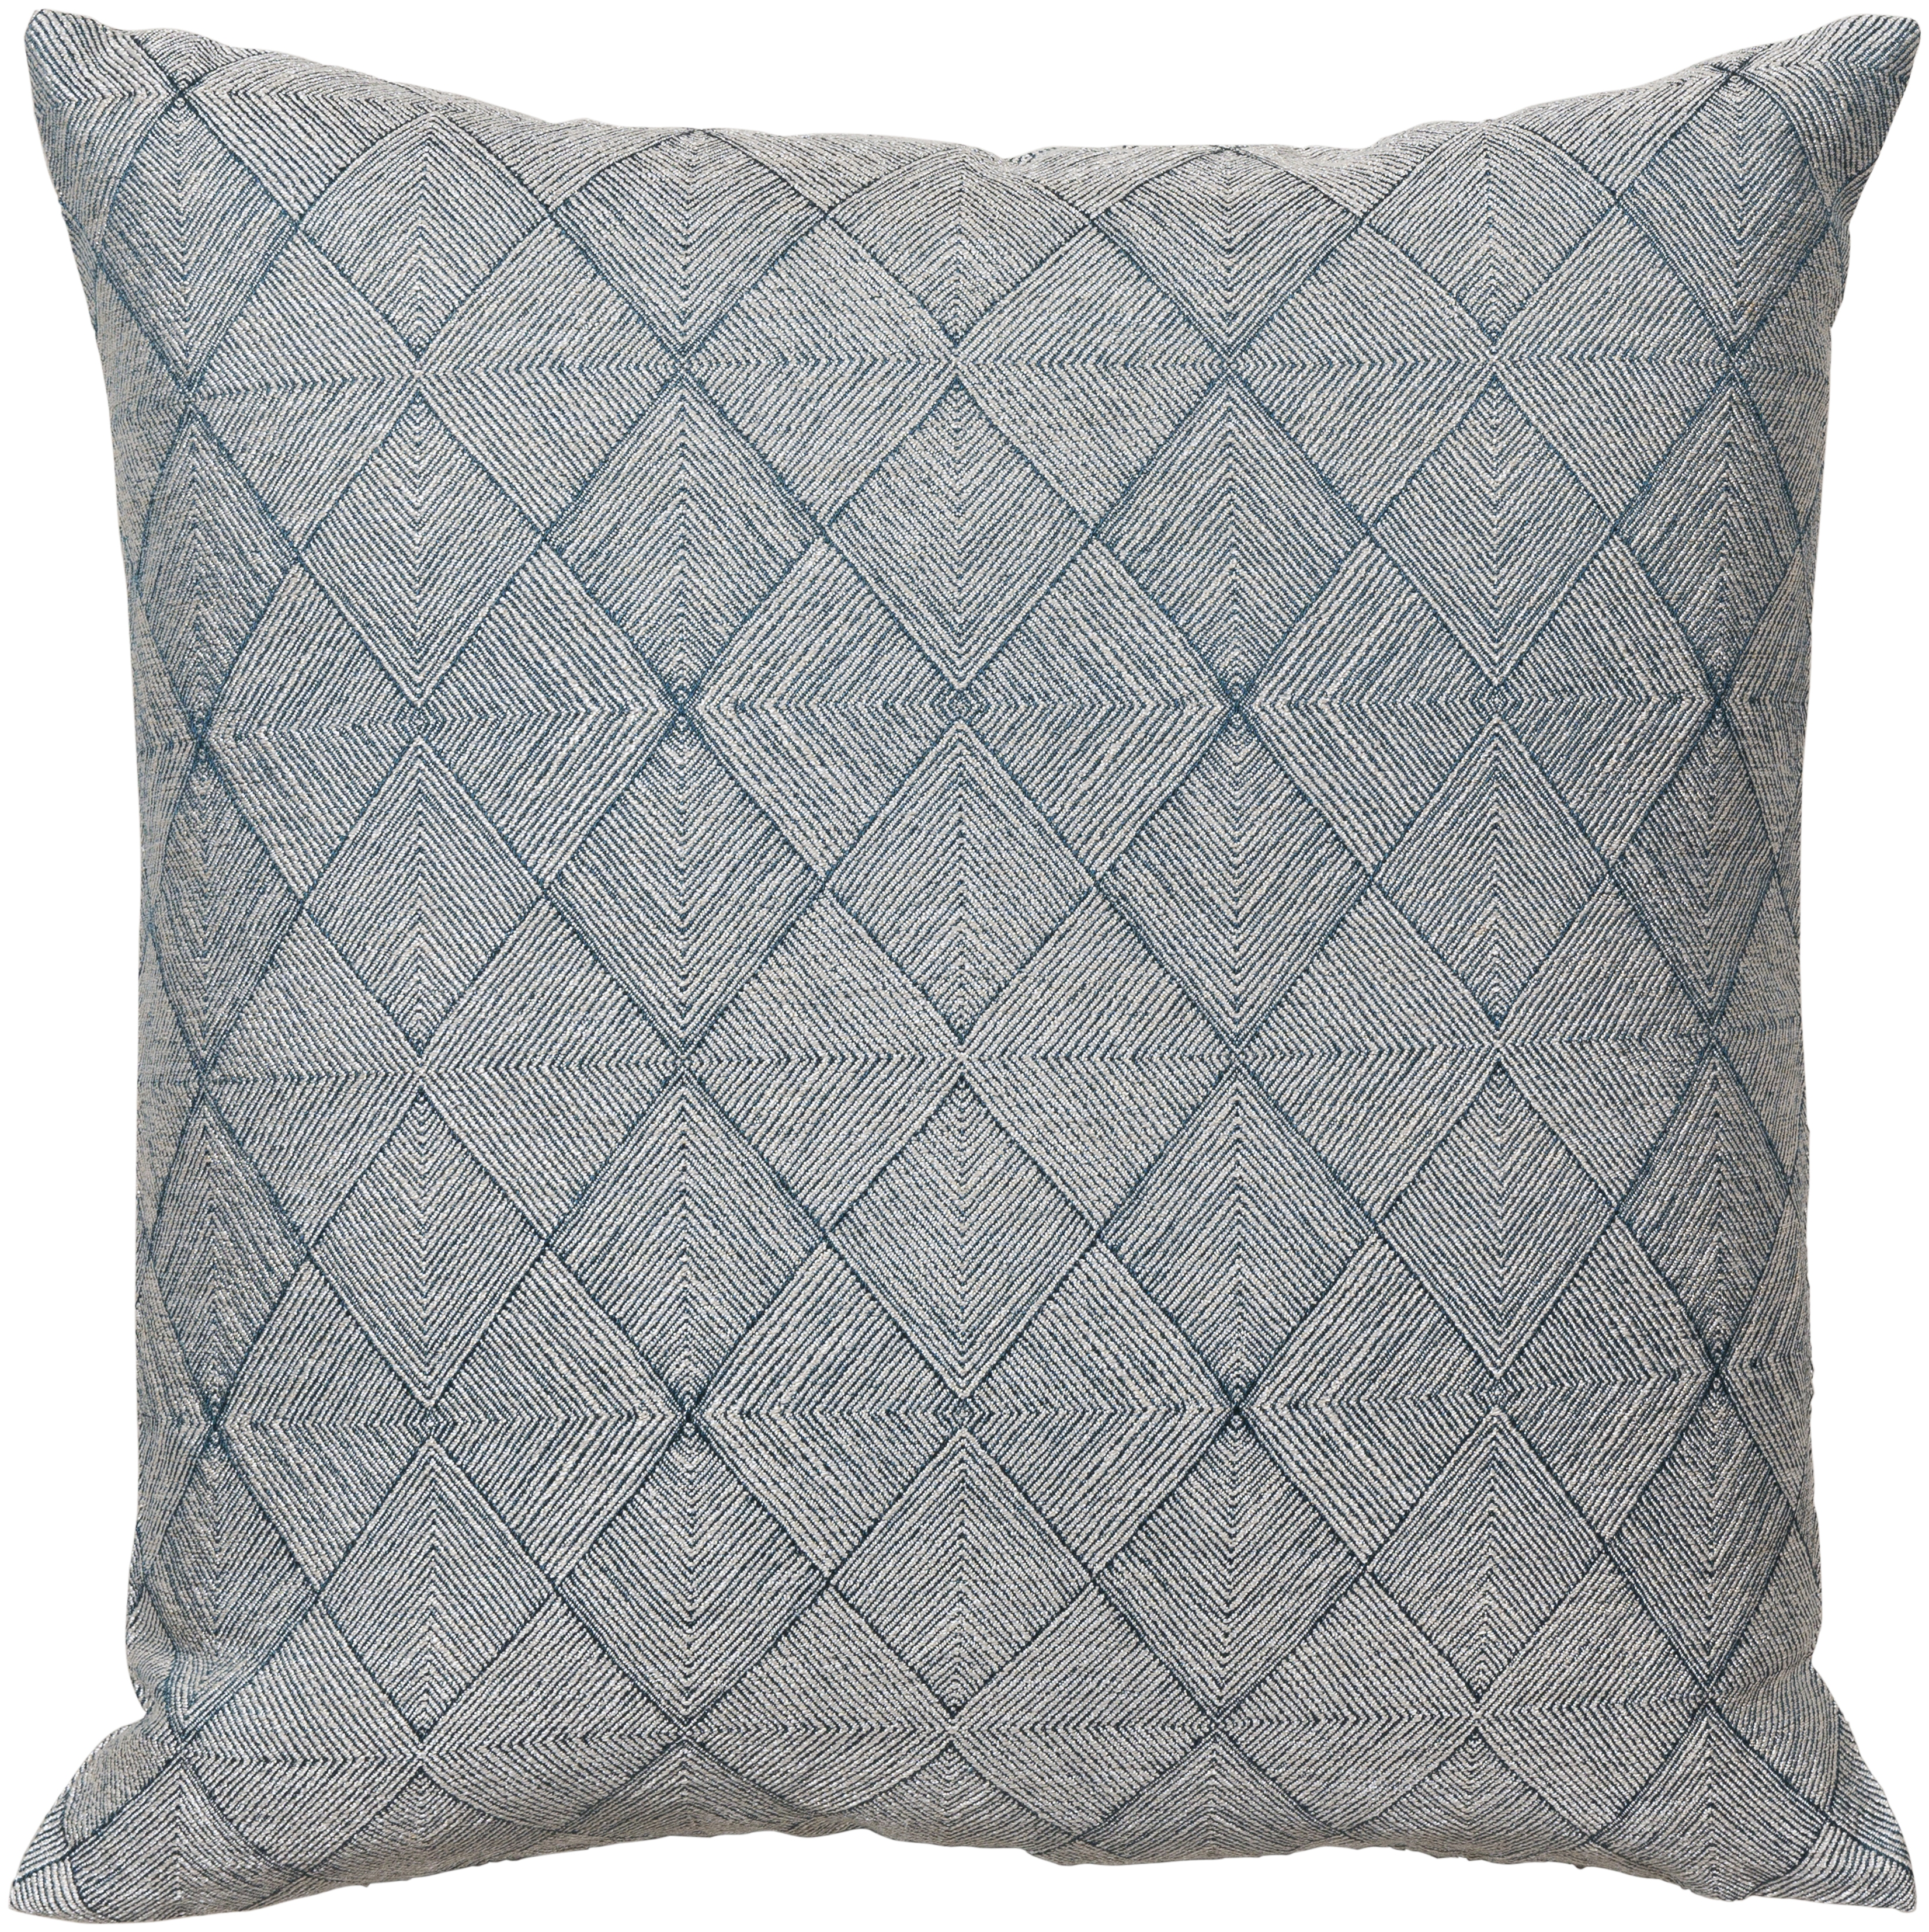 Messina Throw Pillow, Blue, 18" x 18" with Polyester Insert - Image 0